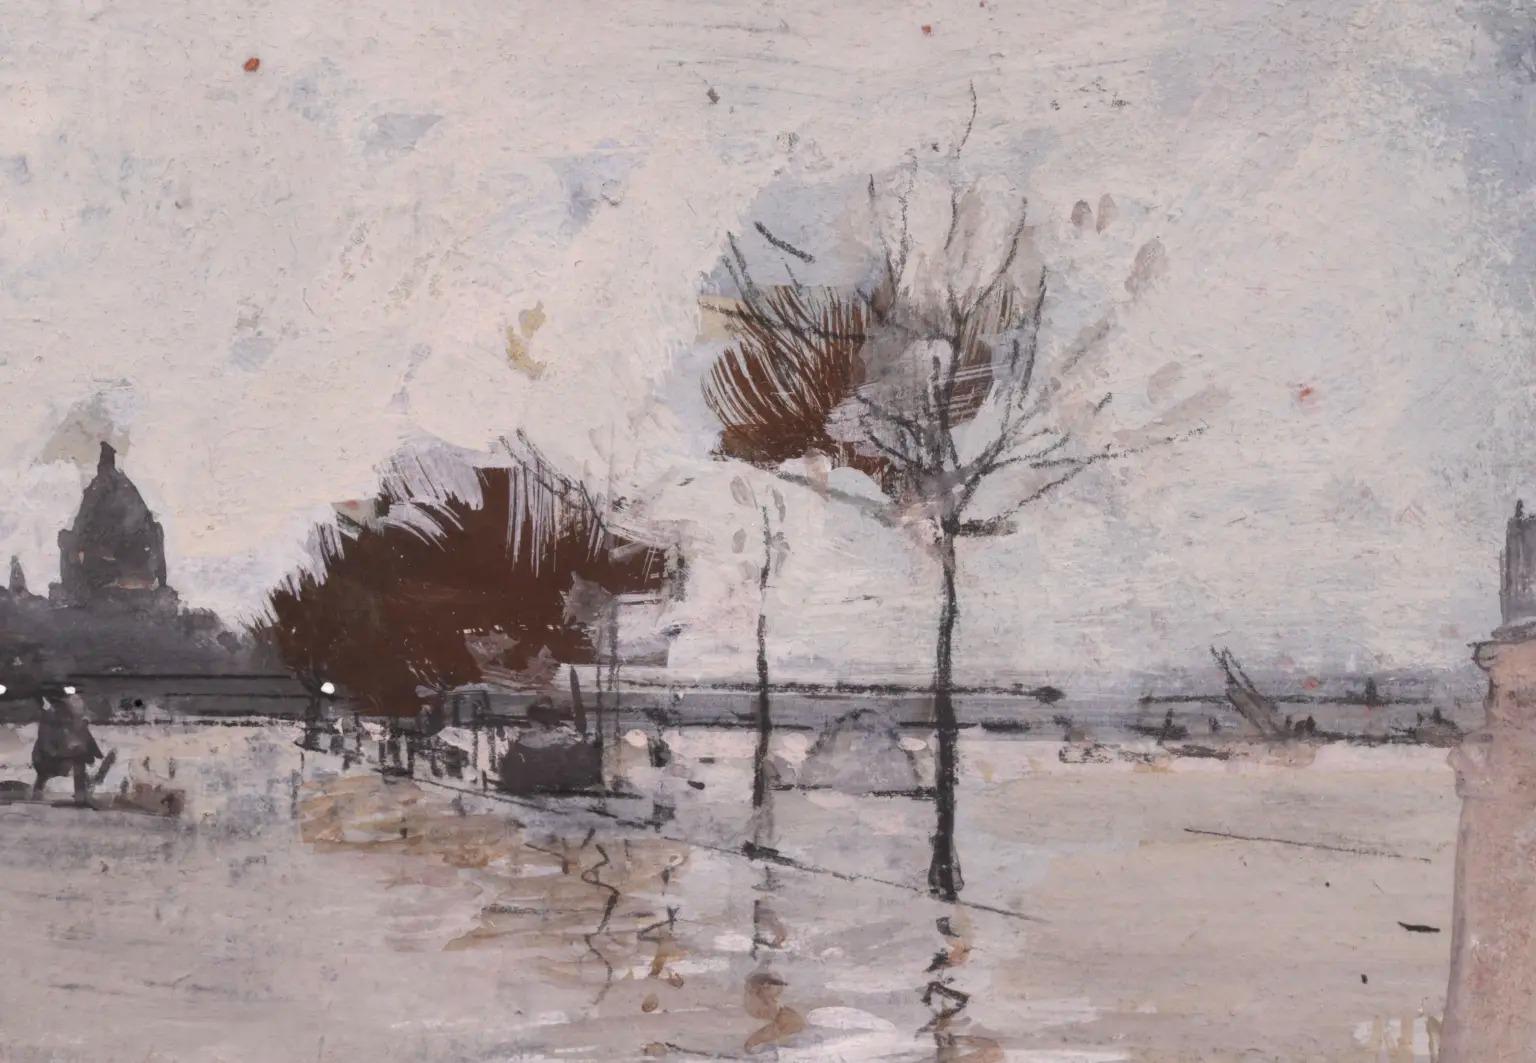 Signed gouache on board impressionist landscape by French painter Luigi Loir. This work depicts the famous flood of Paris in 1910 when the Seine broke its banks in the largest flooding the city had seen in a 100 years. Loir likely painted this work